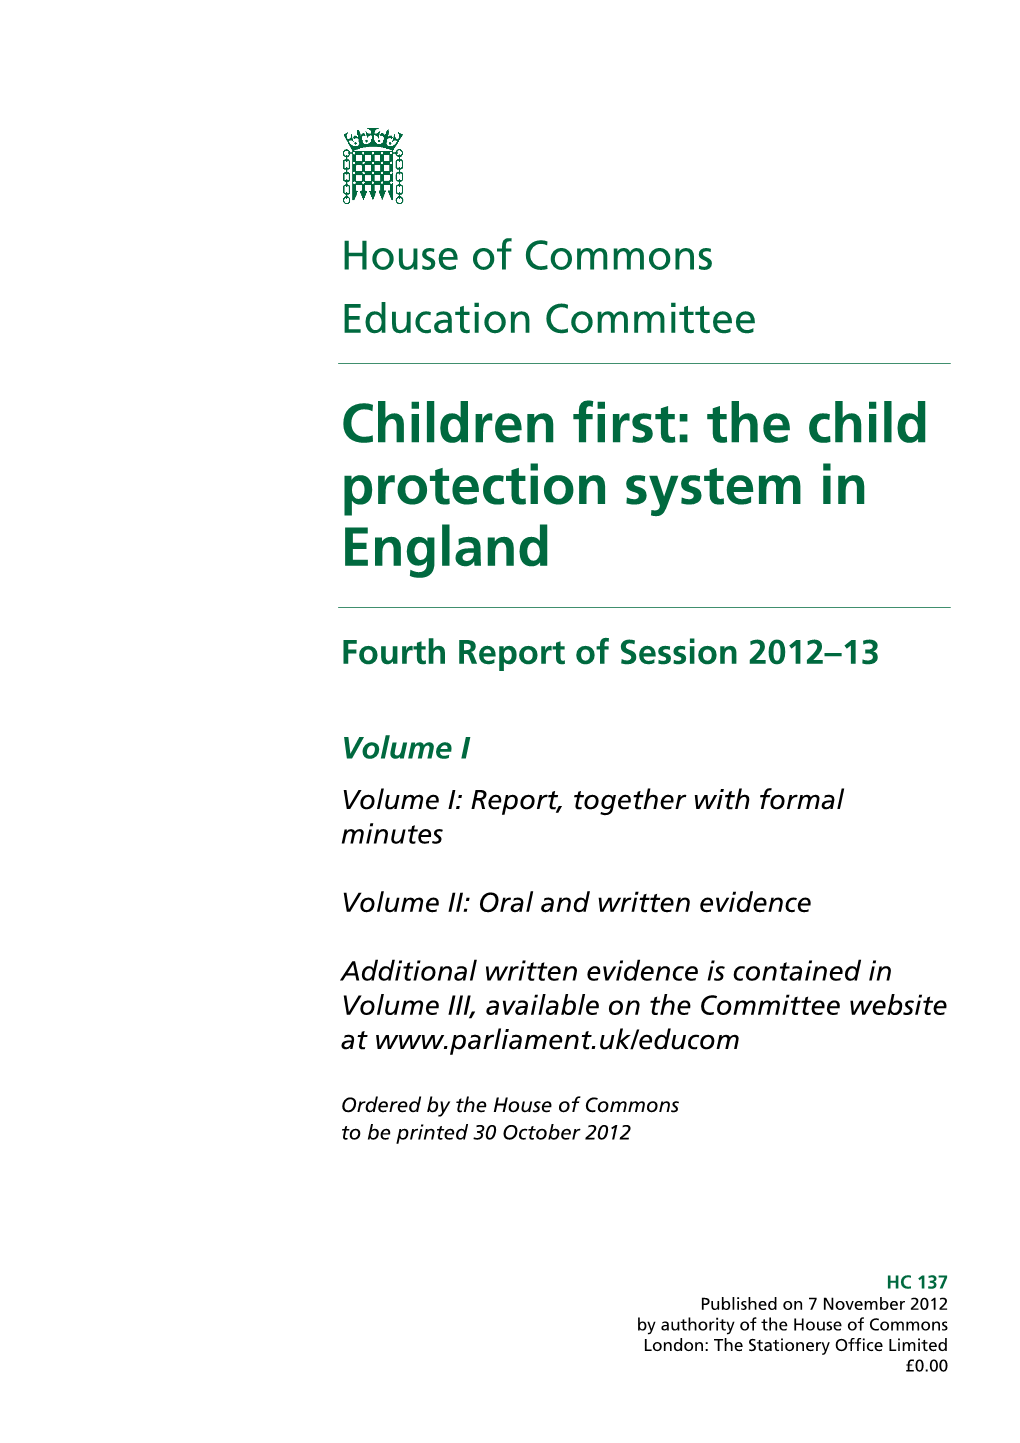 Children First: the Child Protection System in England